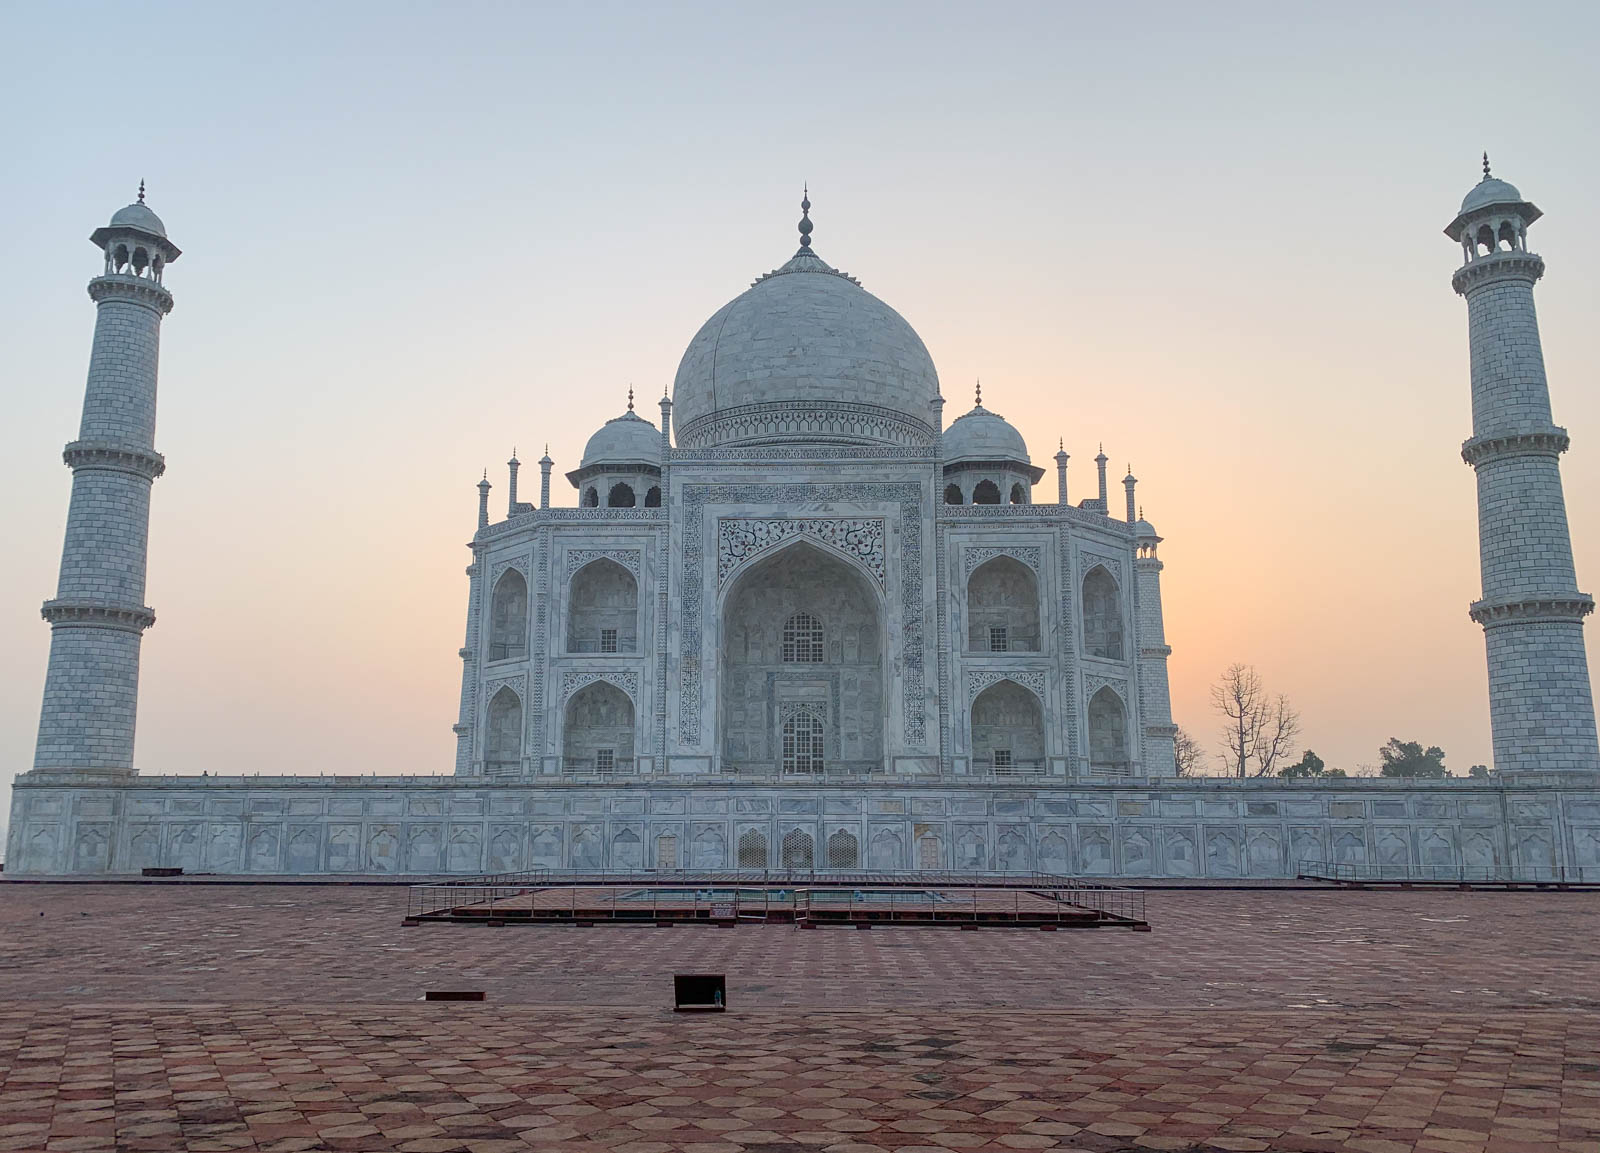 Brian may have gotten yelled at by some influencers as he took this sunrise Taj Mahal photo